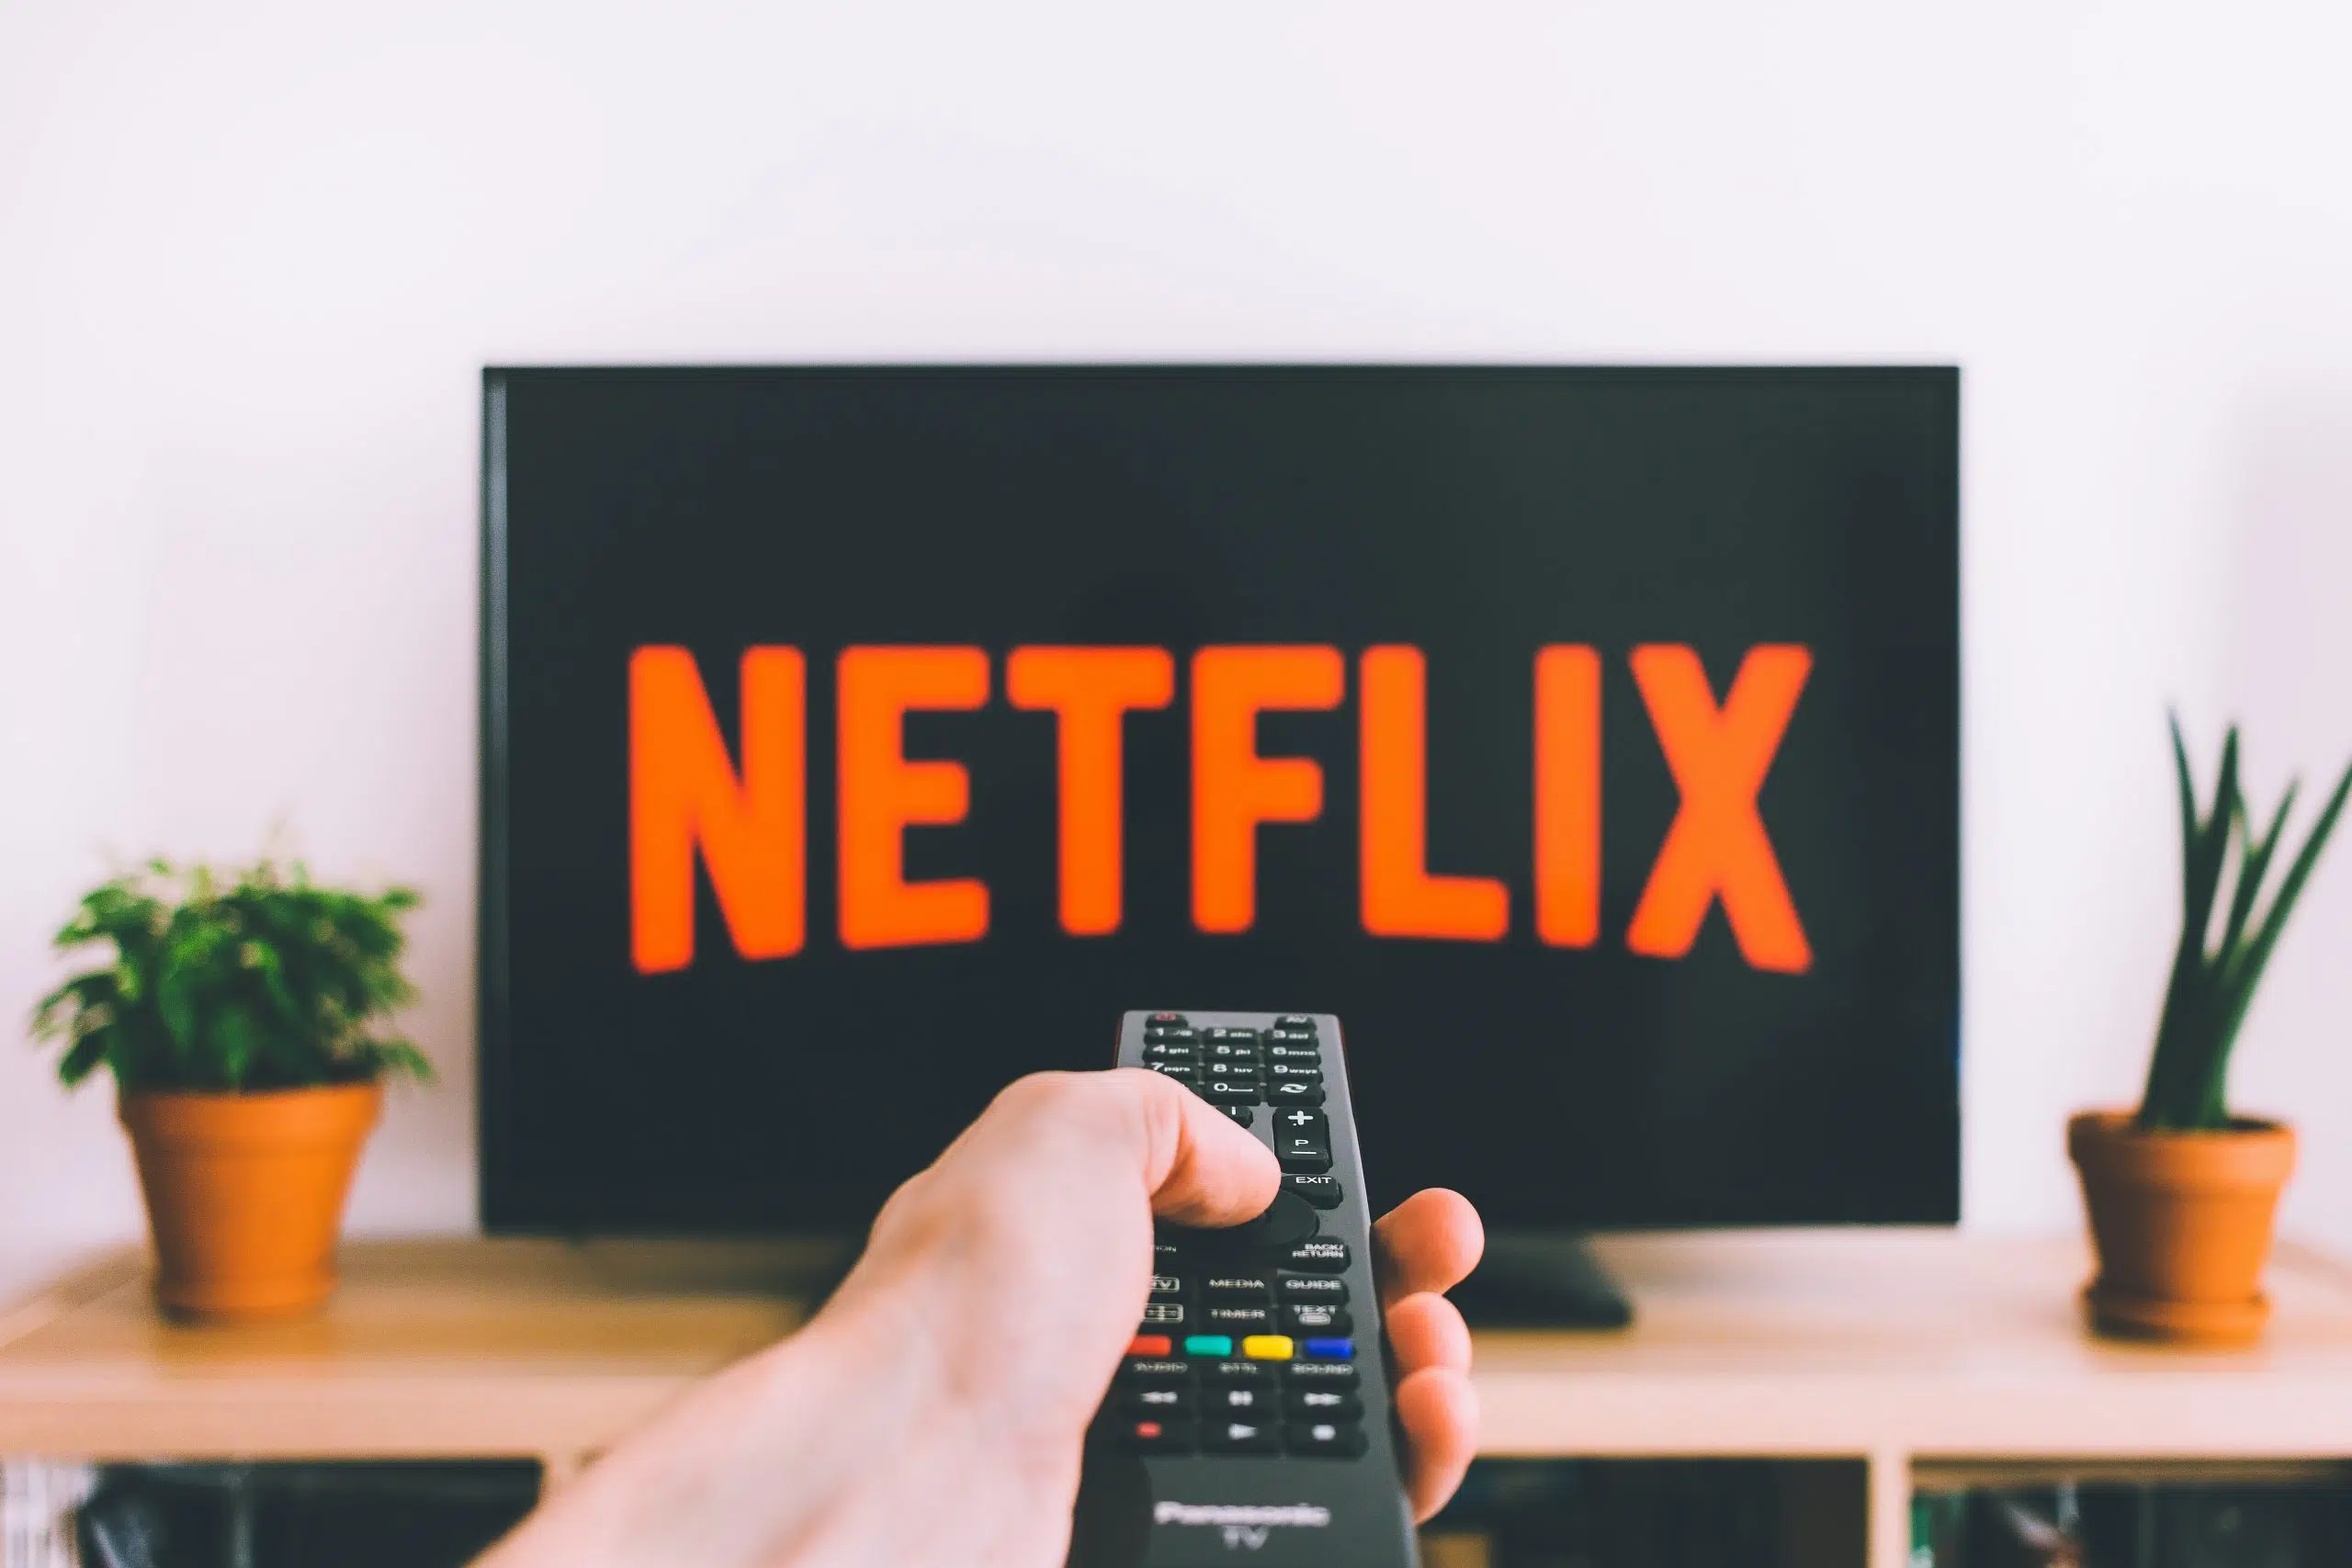 Would you being willing to watch ads on Netflix if the monthly fee was only $5.99/month?